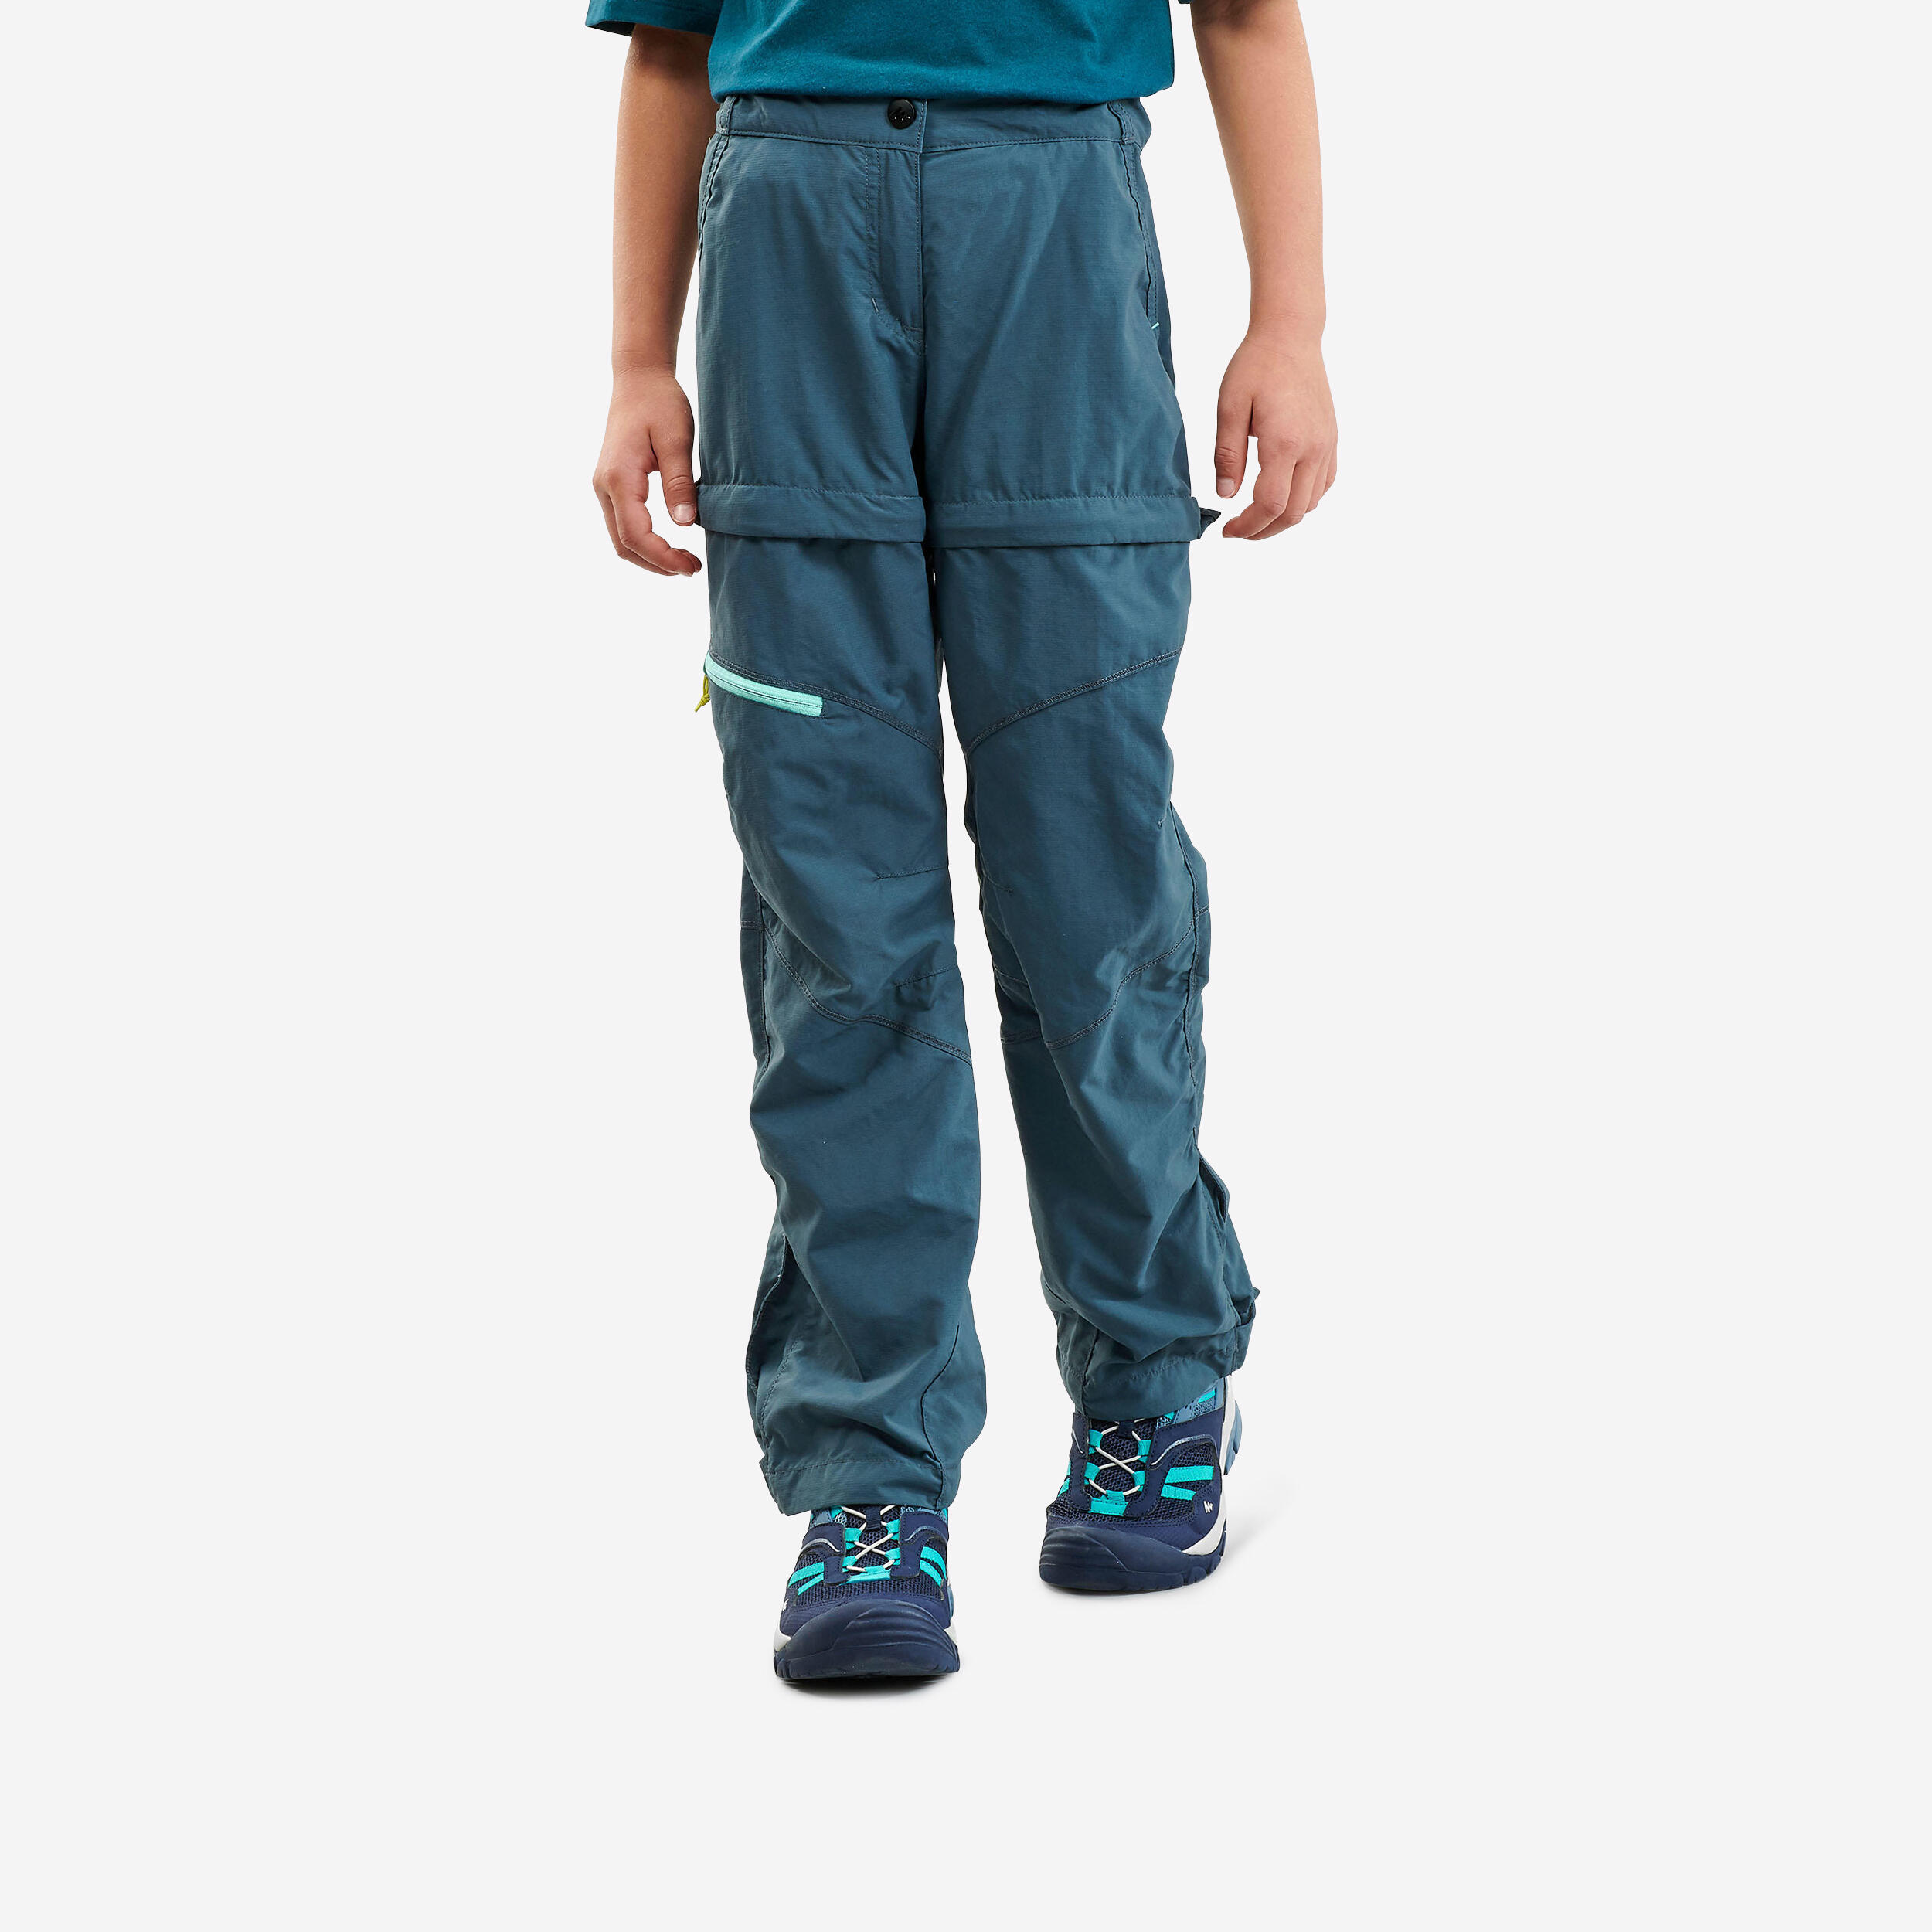 Kids' Modular Hiking Trousers MH500 KID Aged 7-15 Turquoise